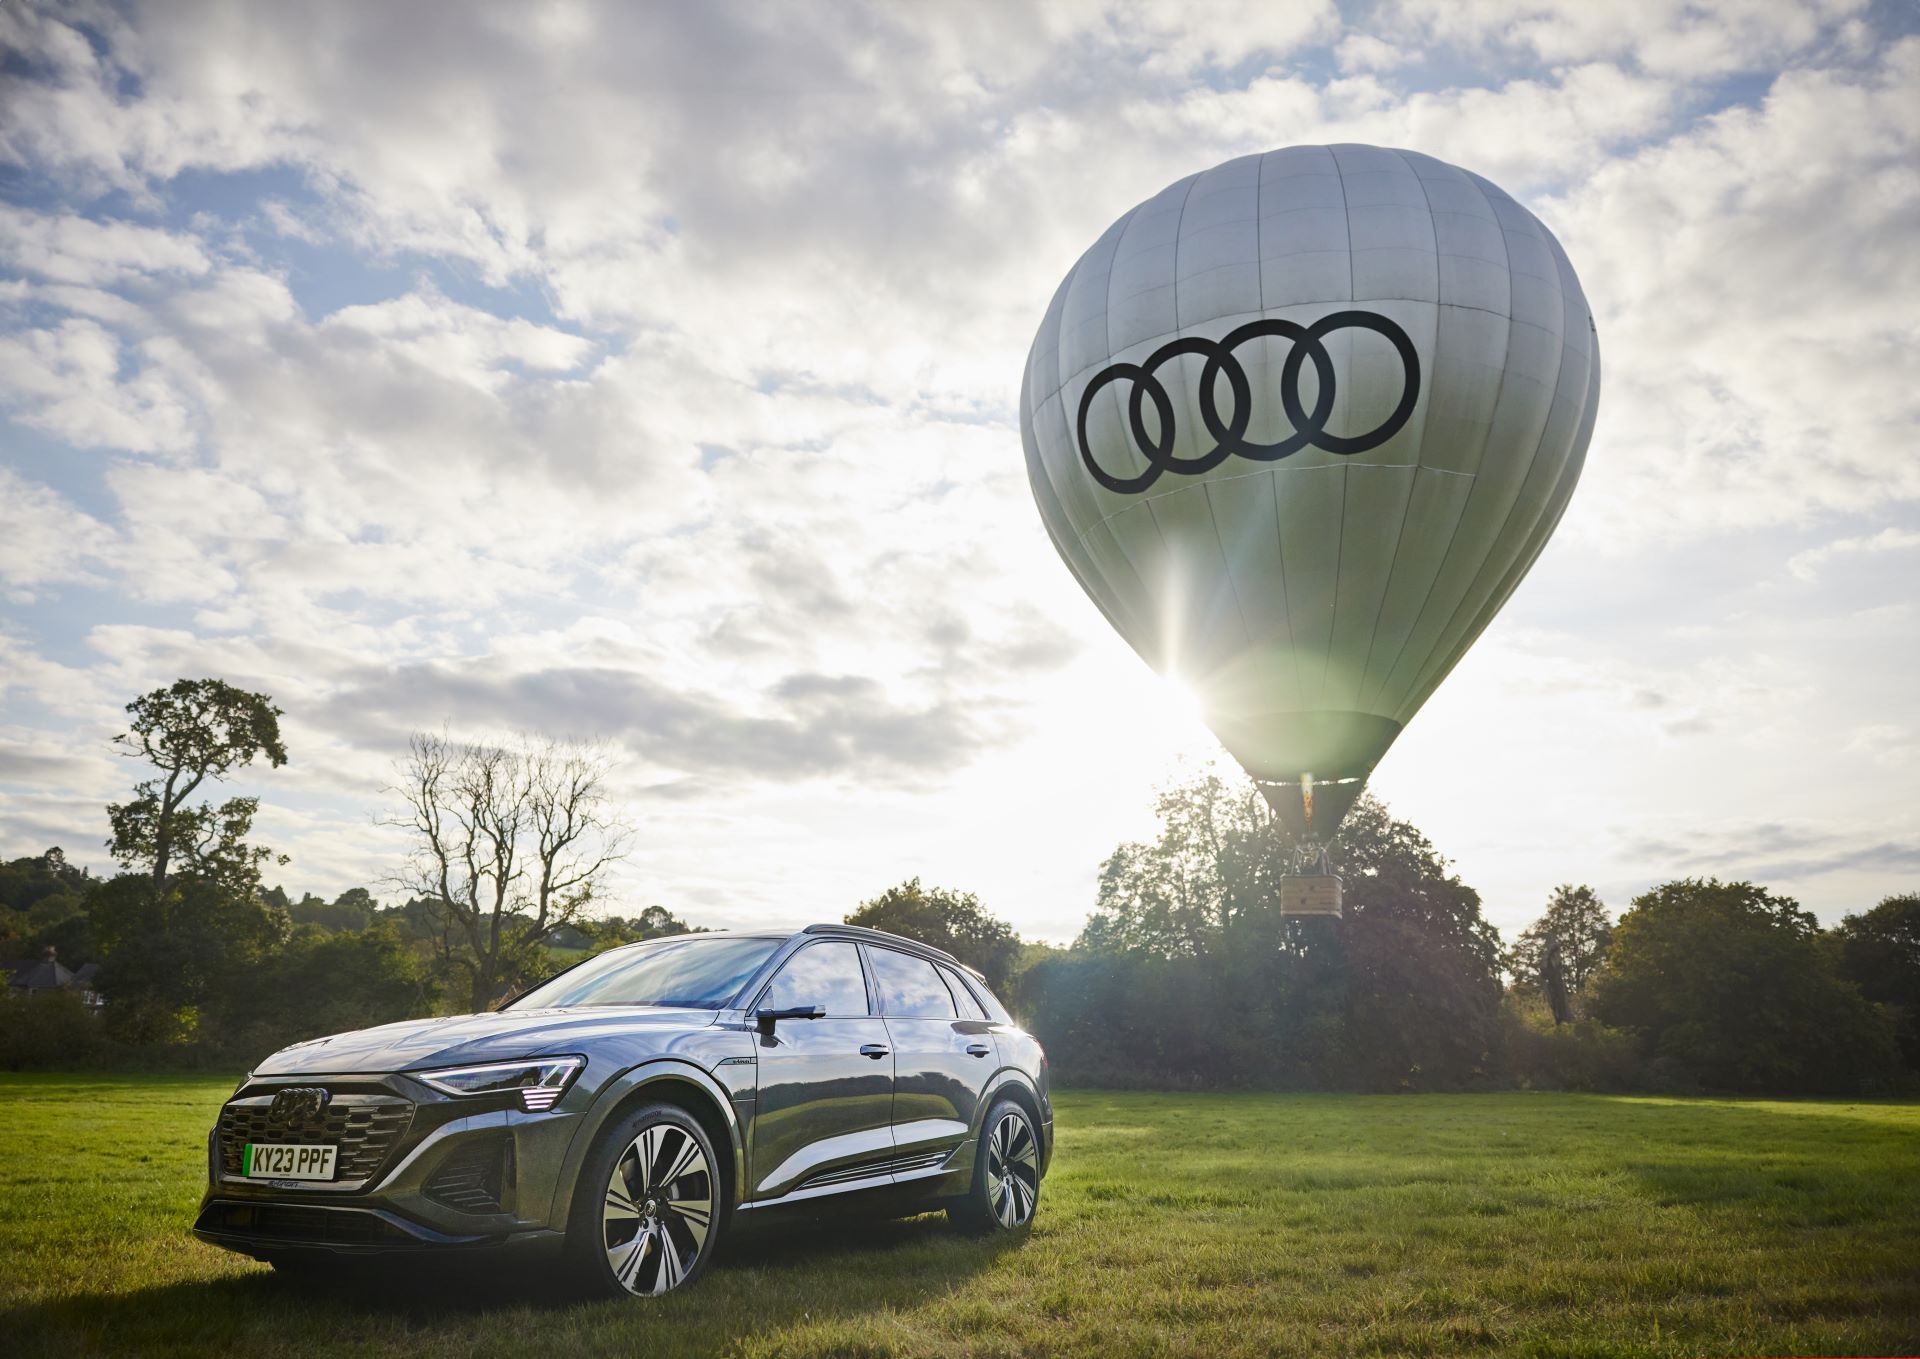 Audi takes to the skies with The Queen’s Cup Hot Air Balloon Race